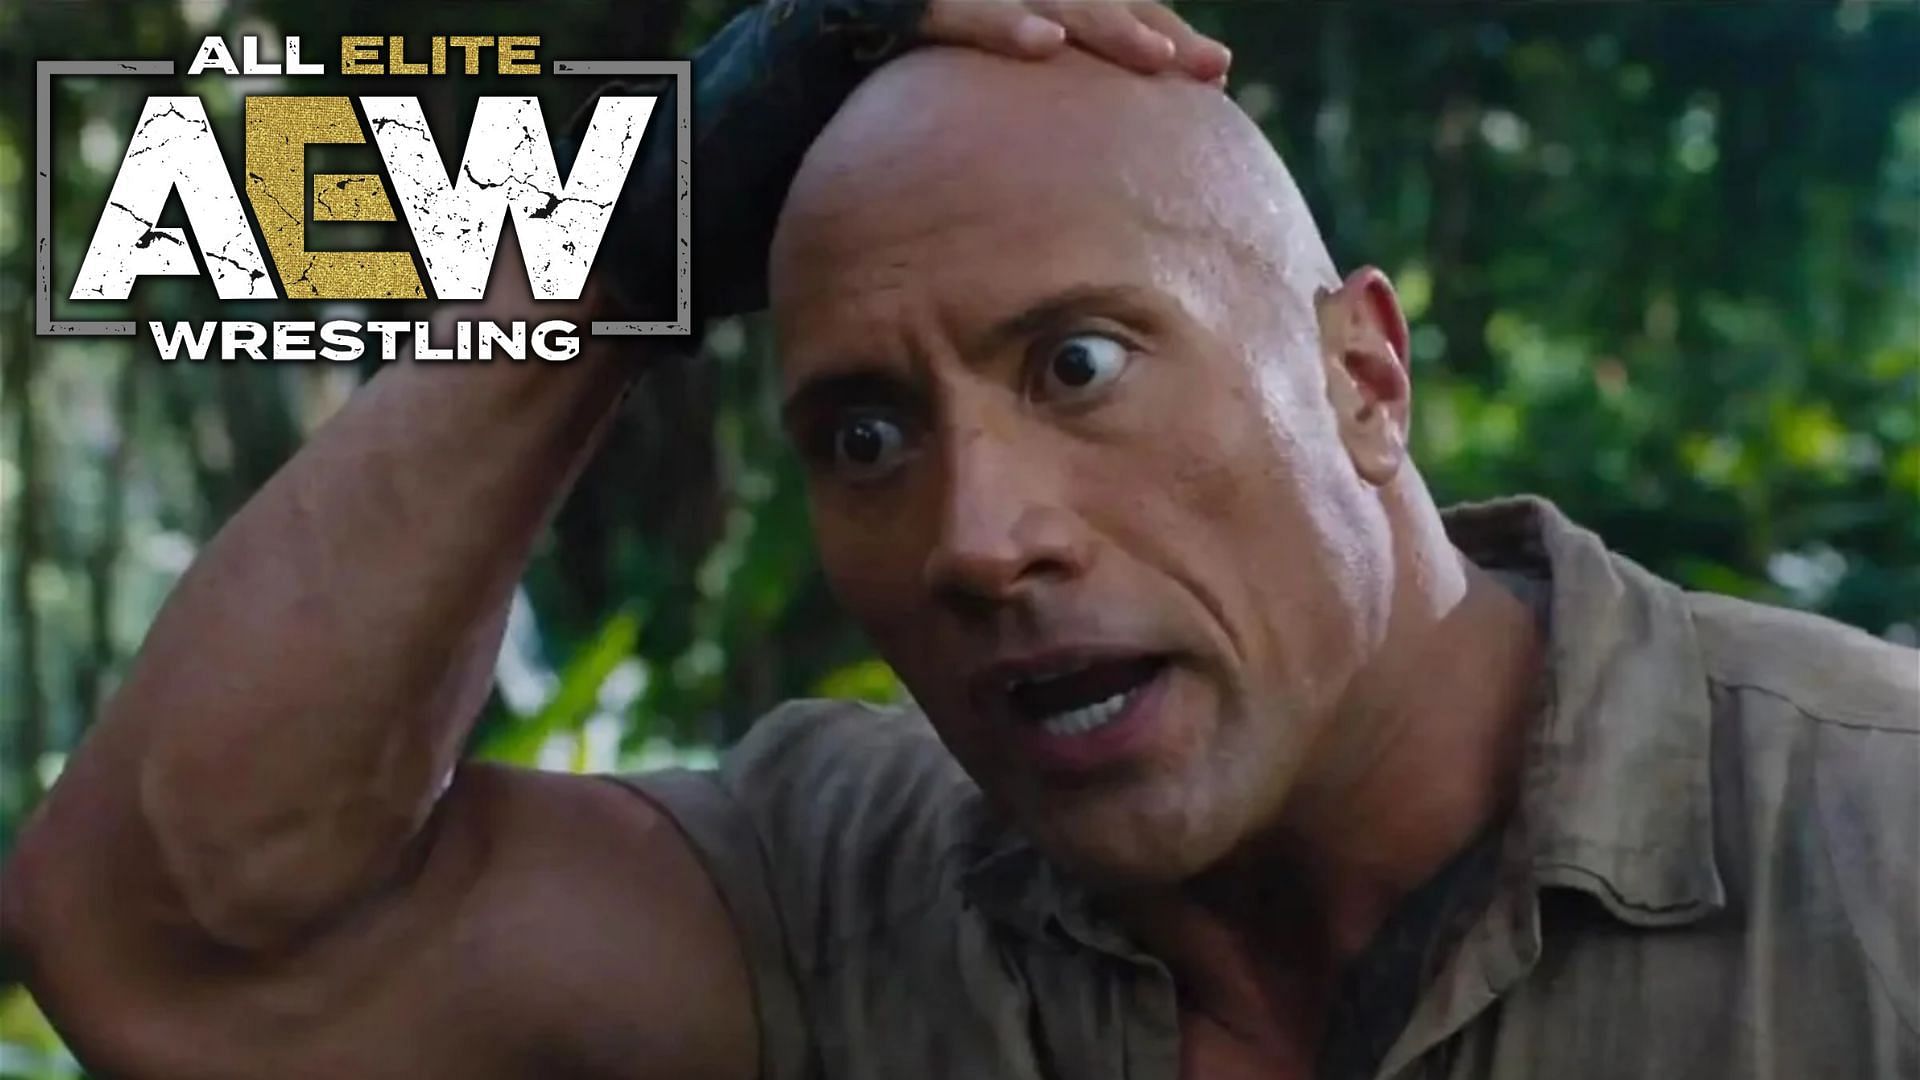 The Rock has had a monumental wrestling career.